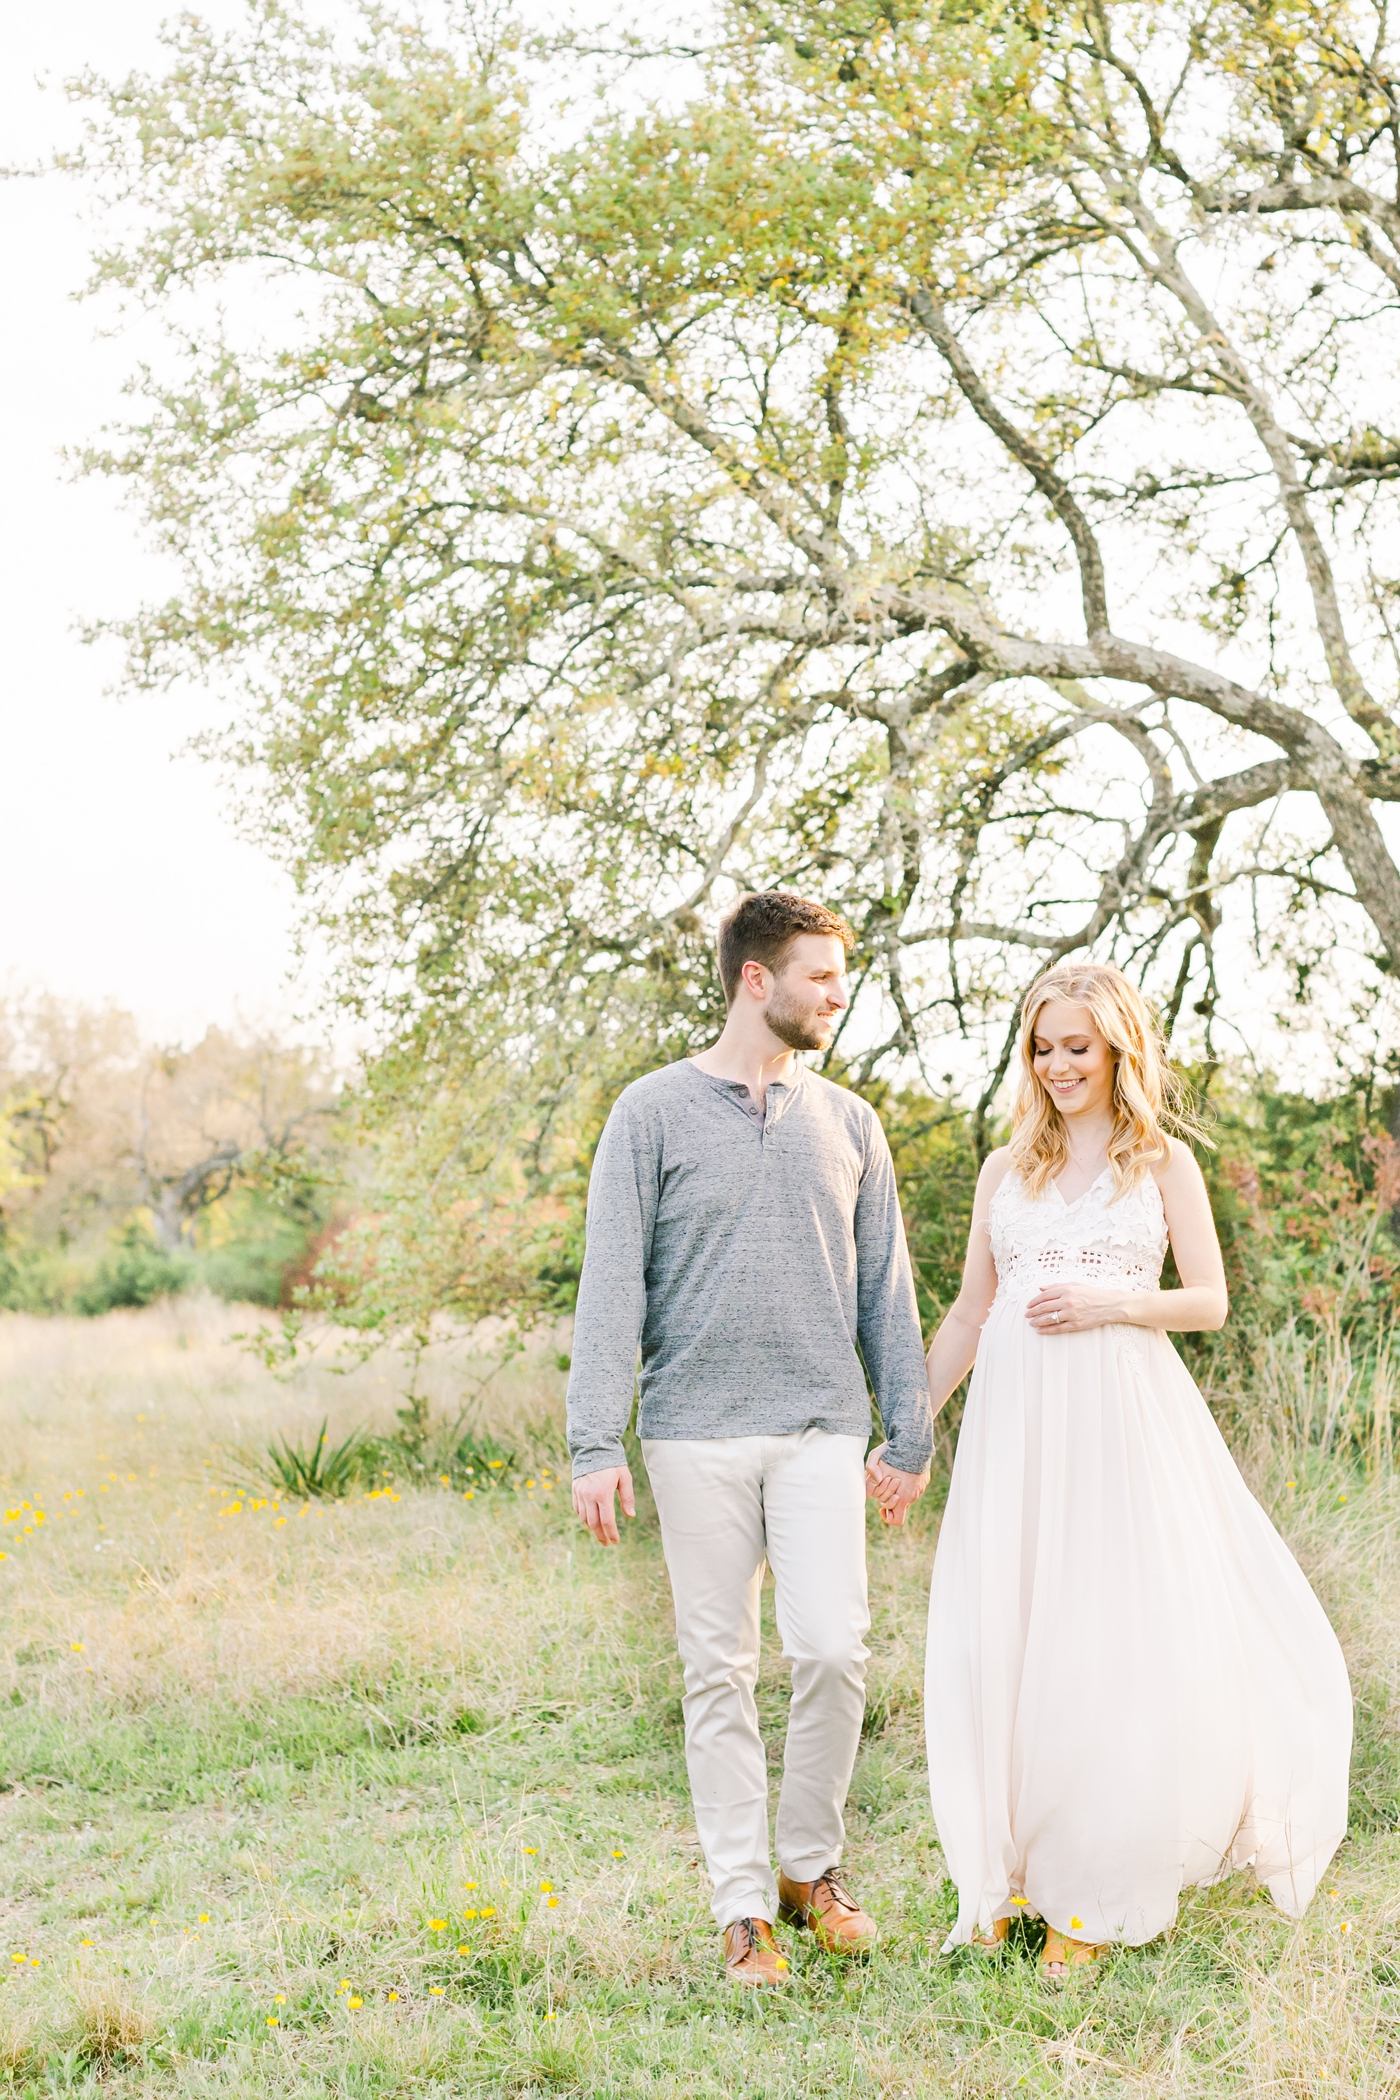 Expecting parents holding hands and walking in field of wildflowers. Photo by Austin maternity photographer, Sana Ahmed Photography.